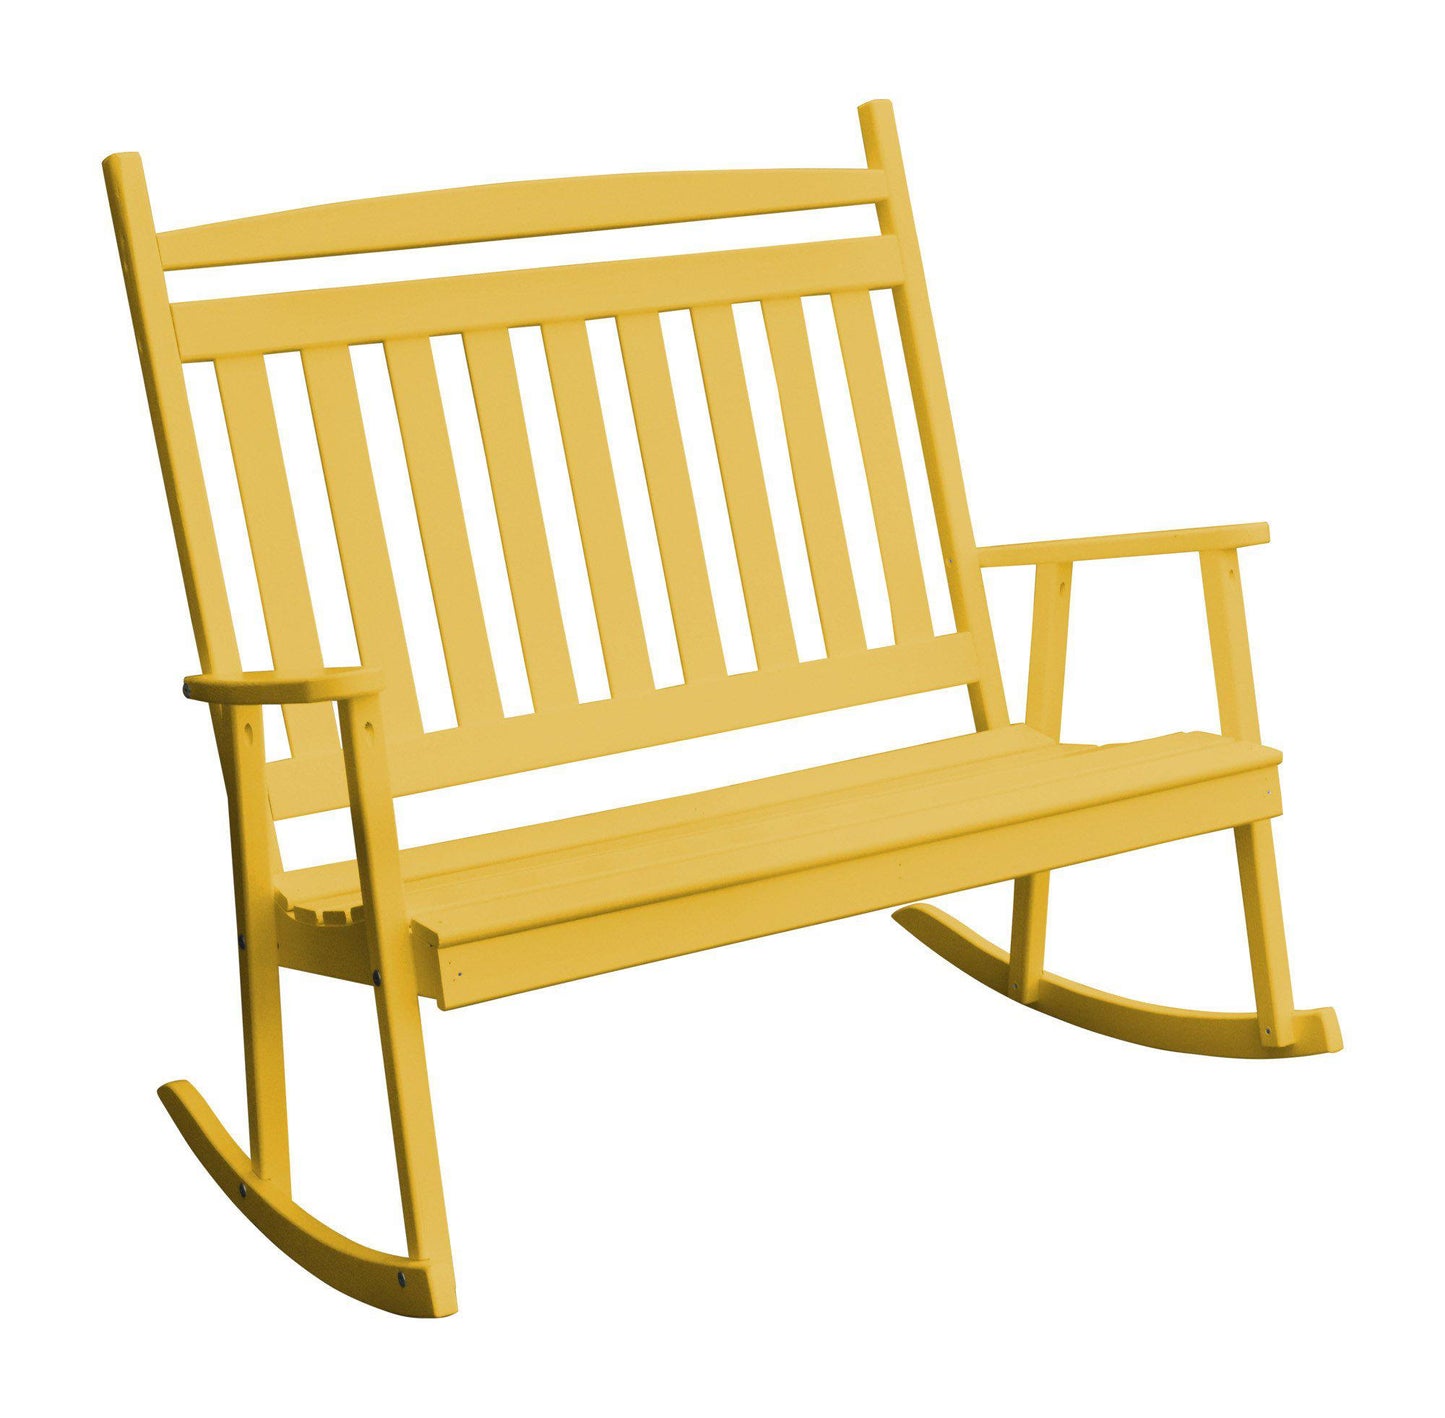 A&L FURNITURE CO. Yellow Pine Double Classic Porch Rocking Chair - LEAD TIME TO SHIP 10 BUSINESS DAYS